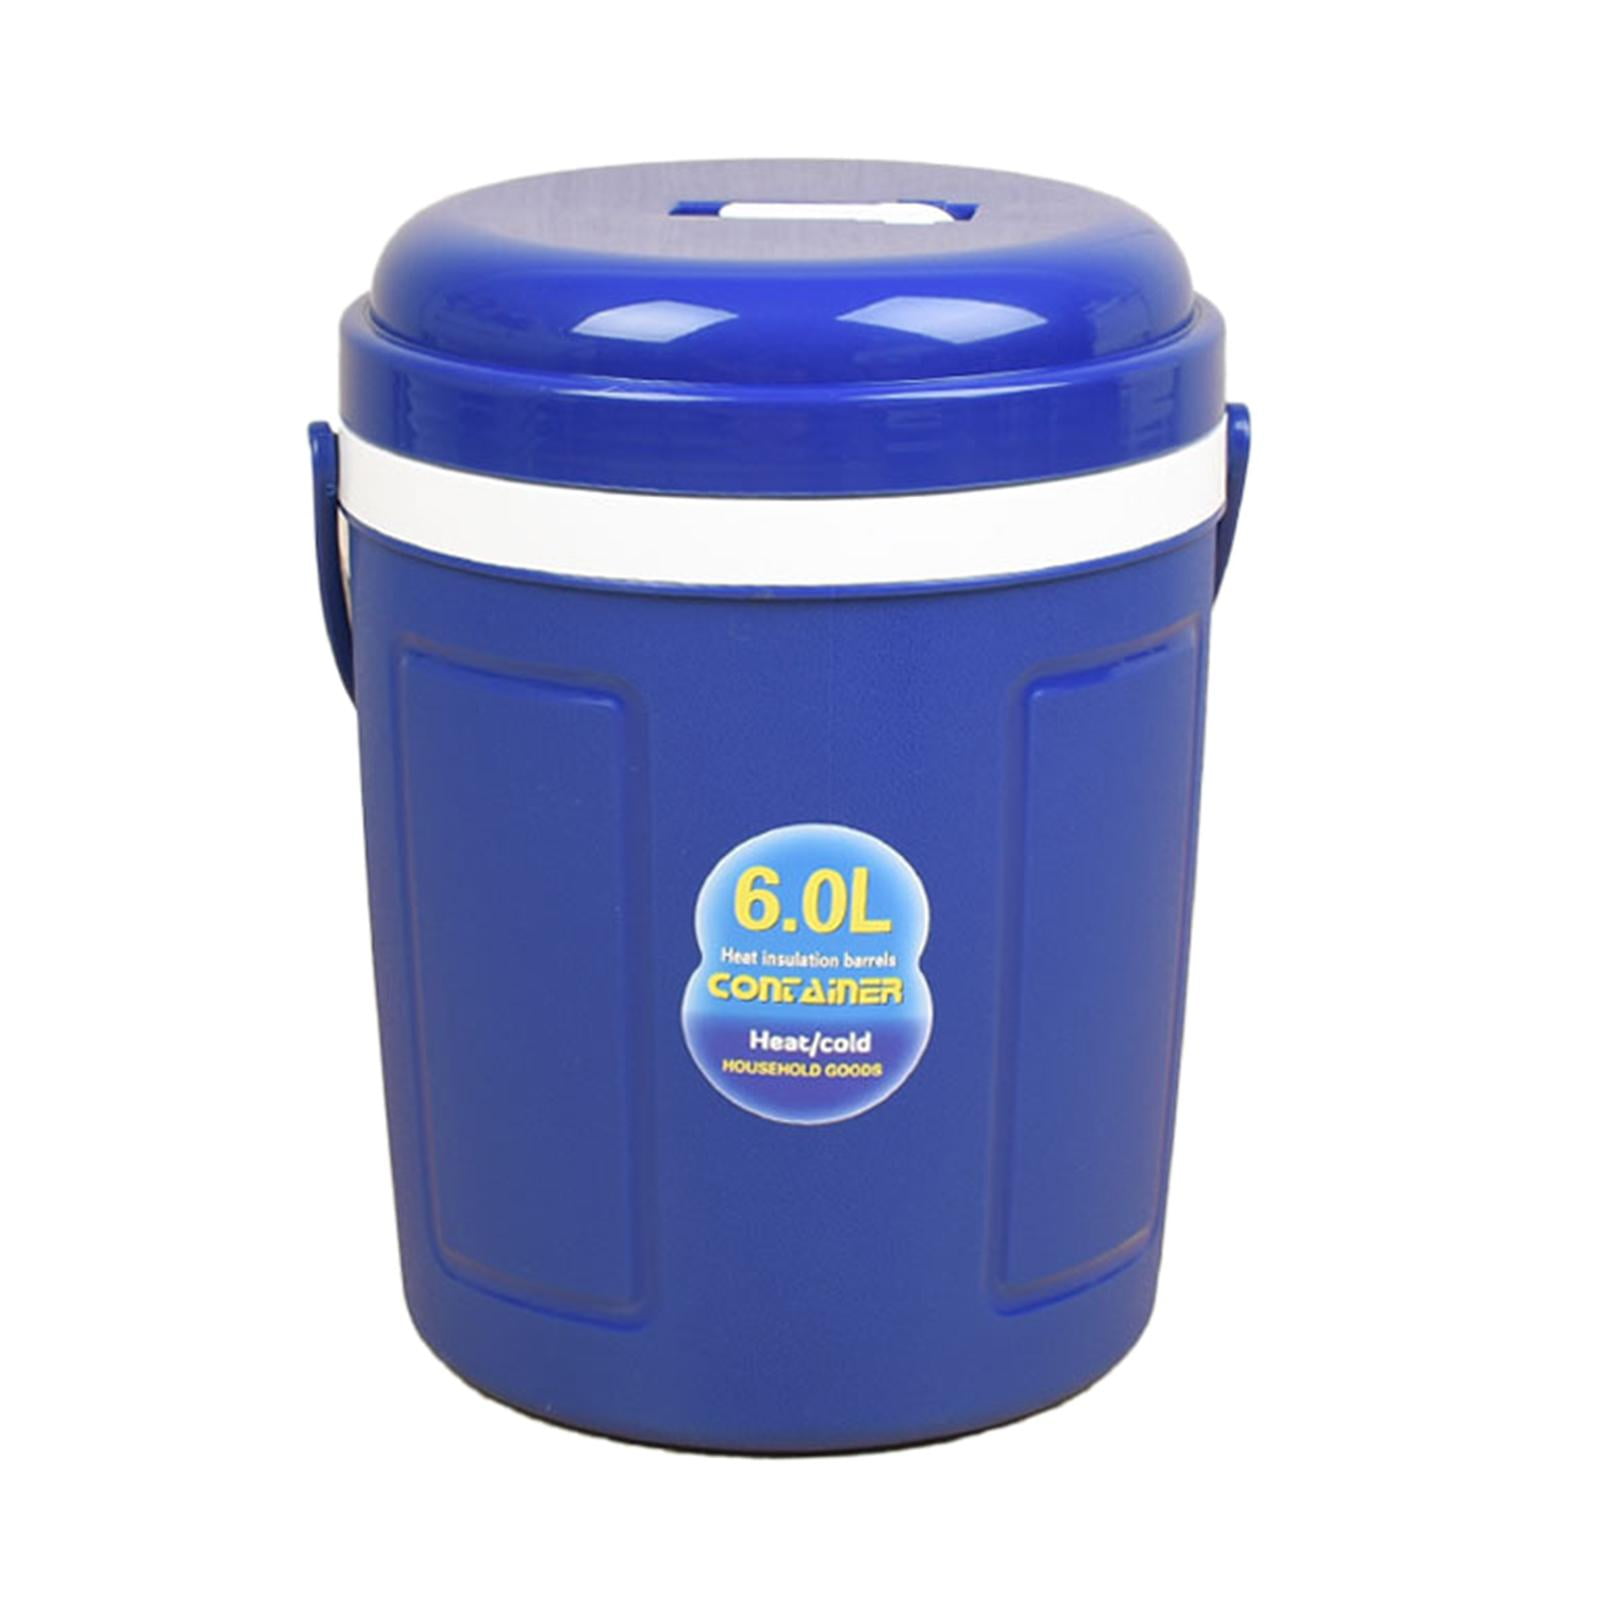  16L Commercial Insulated Rice Barrel, Refrigerated Transport  Bucket with One Botton Exhaust, Iced Container Beverage Carrier Dispenser  for Food Or Cold & Hot Drinks,Blue: Home & Kitchen